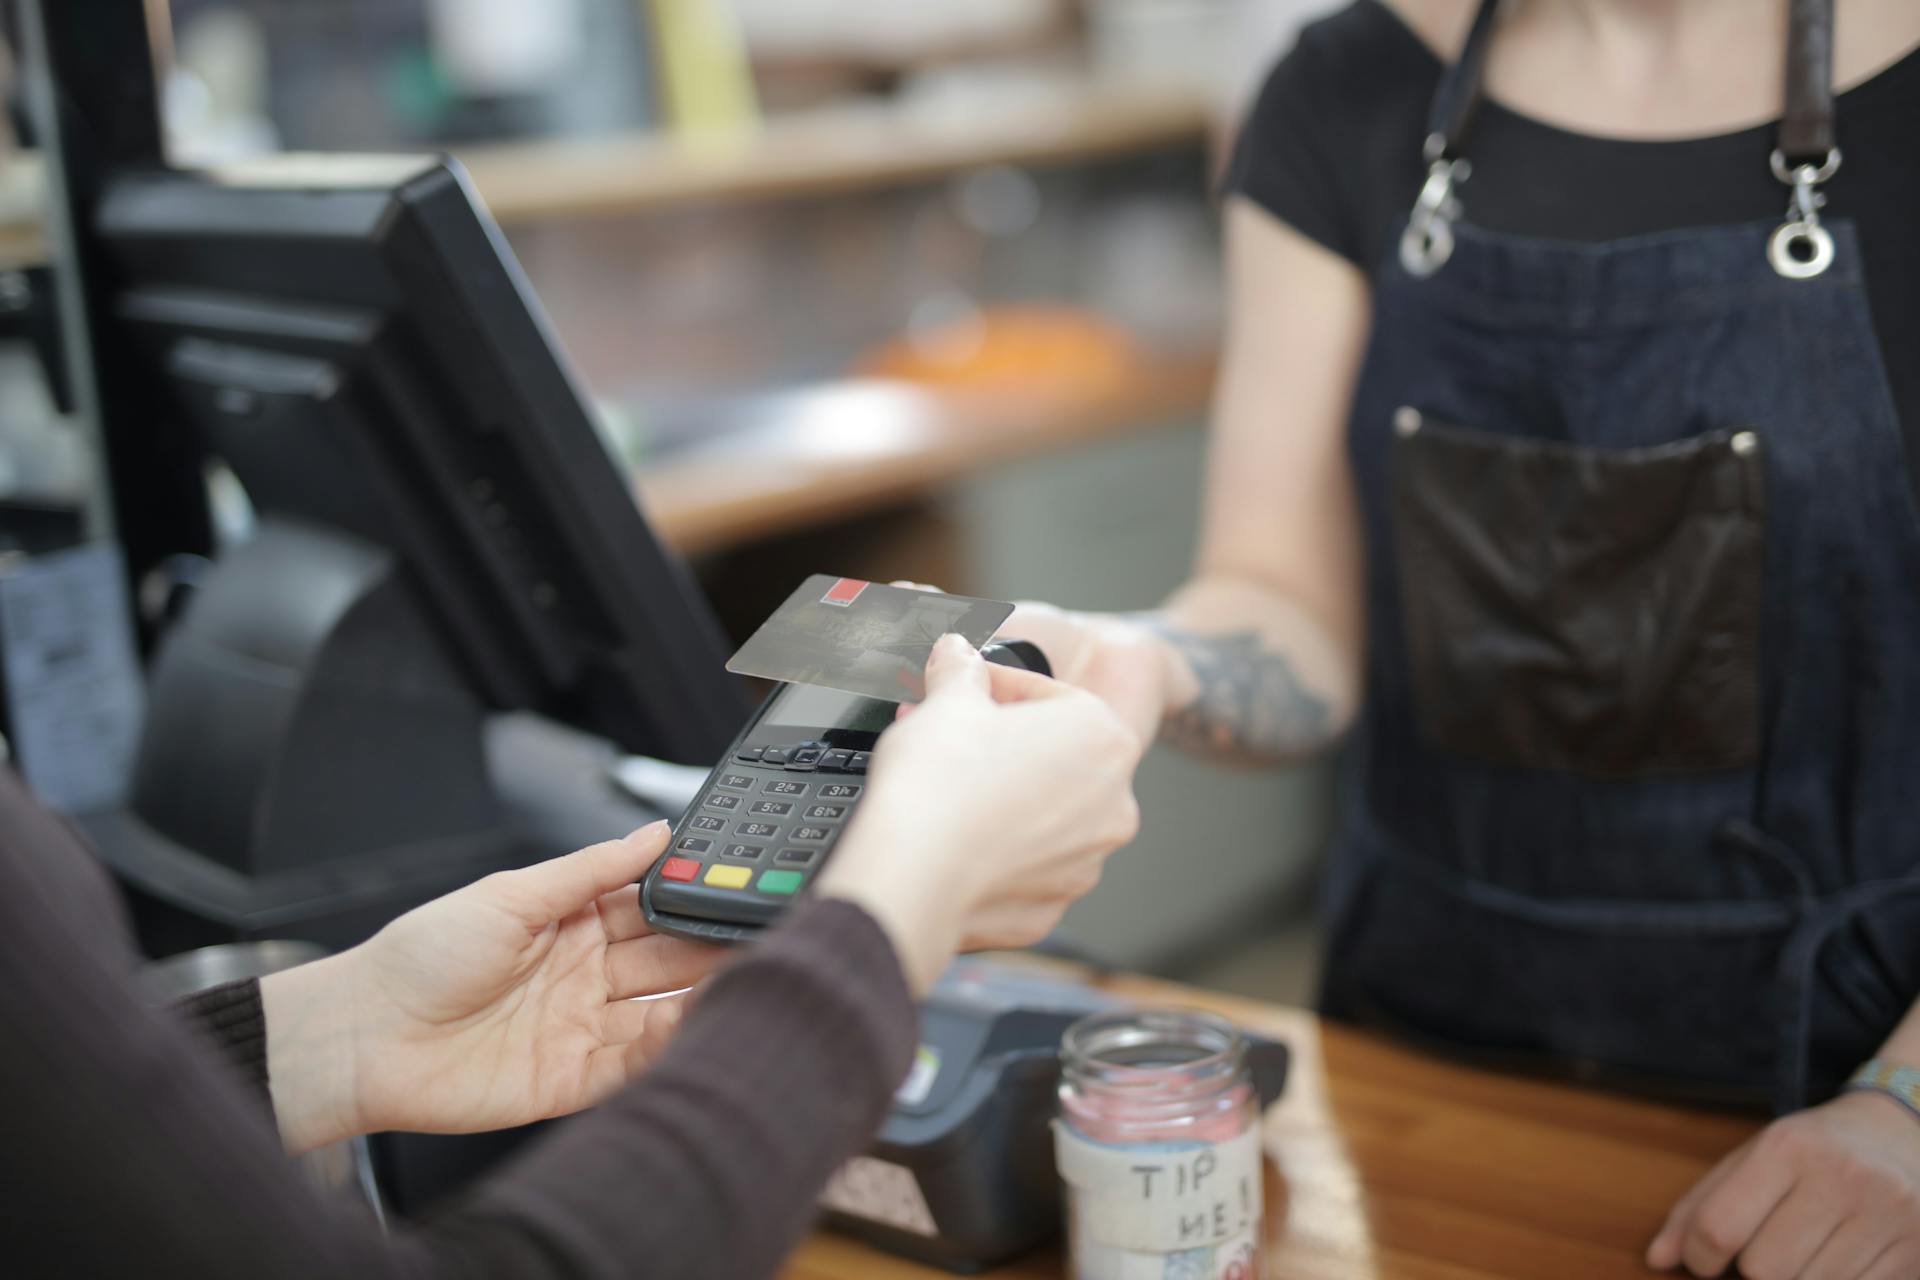 A person paying at cash register | Source: Pexels